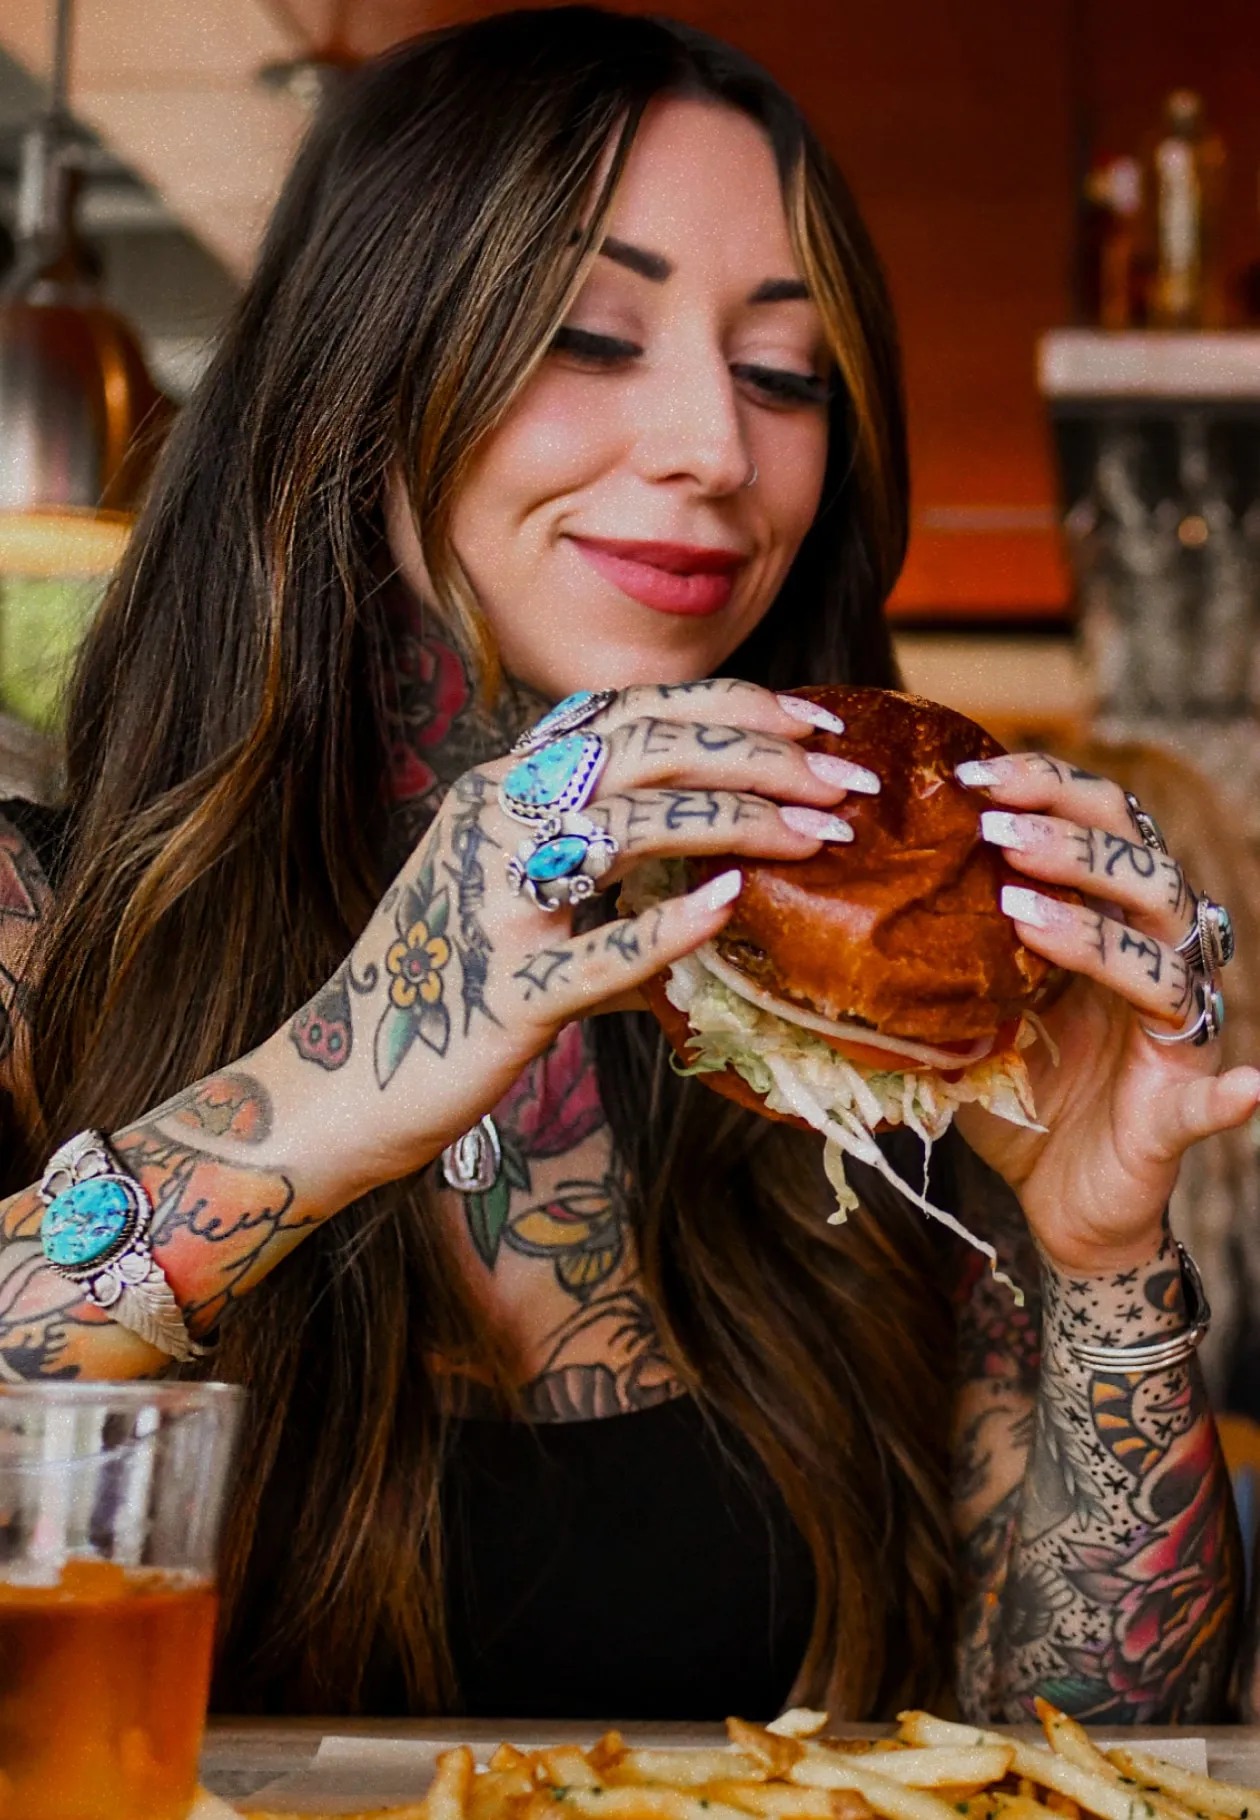 Woman holding a burger while looking at it with a soft smile on her face